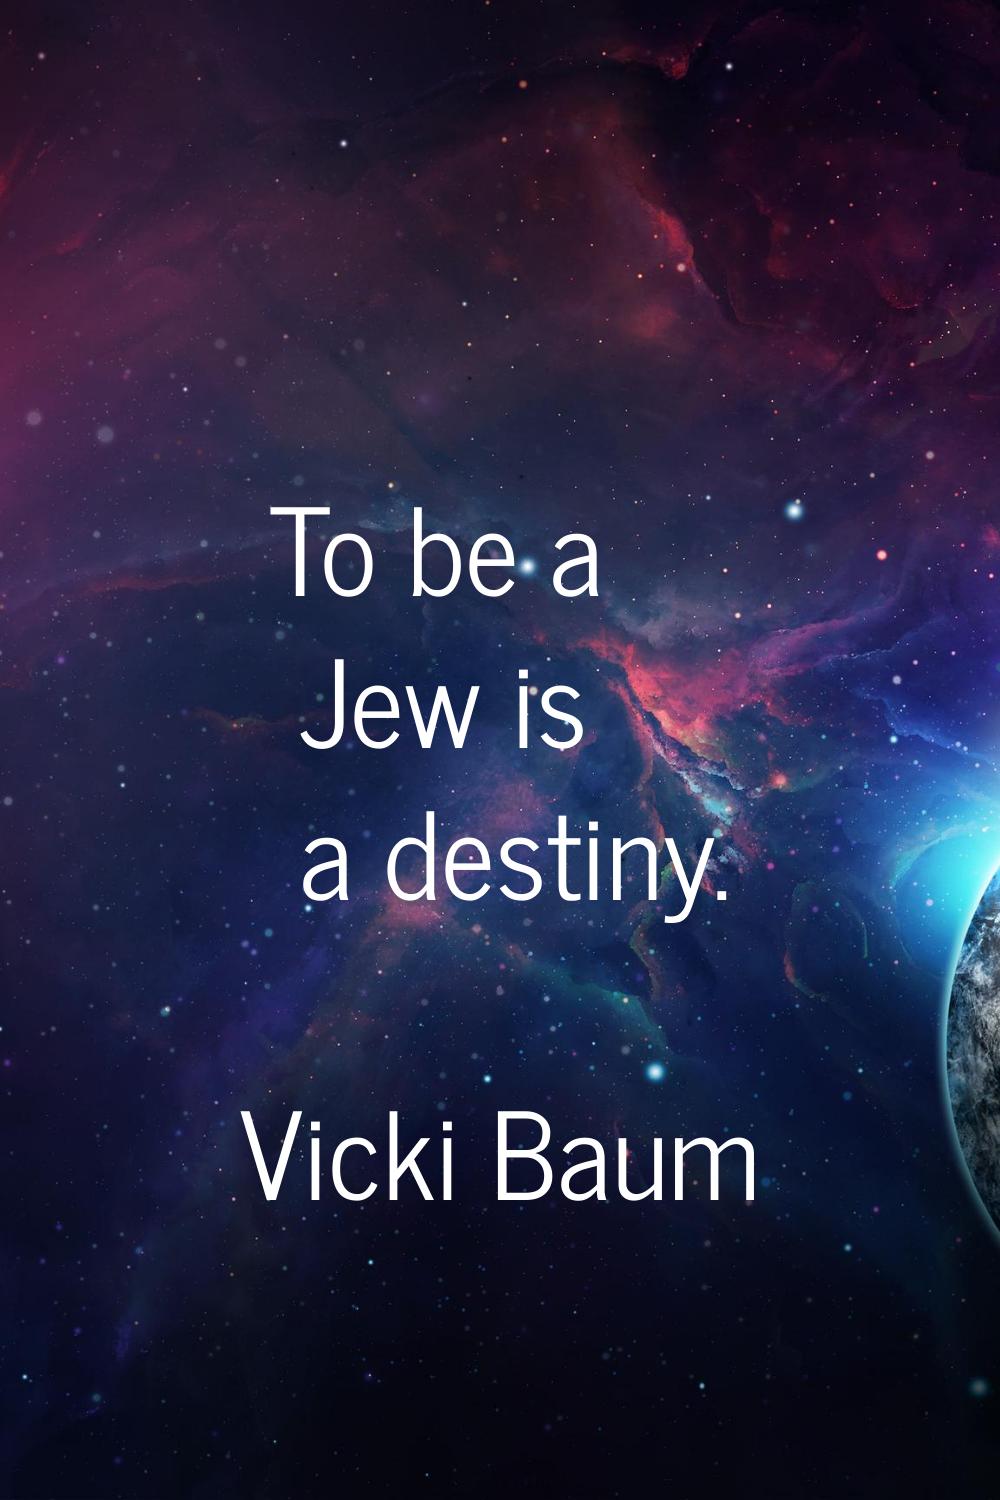 To be a Jew is a destiny.